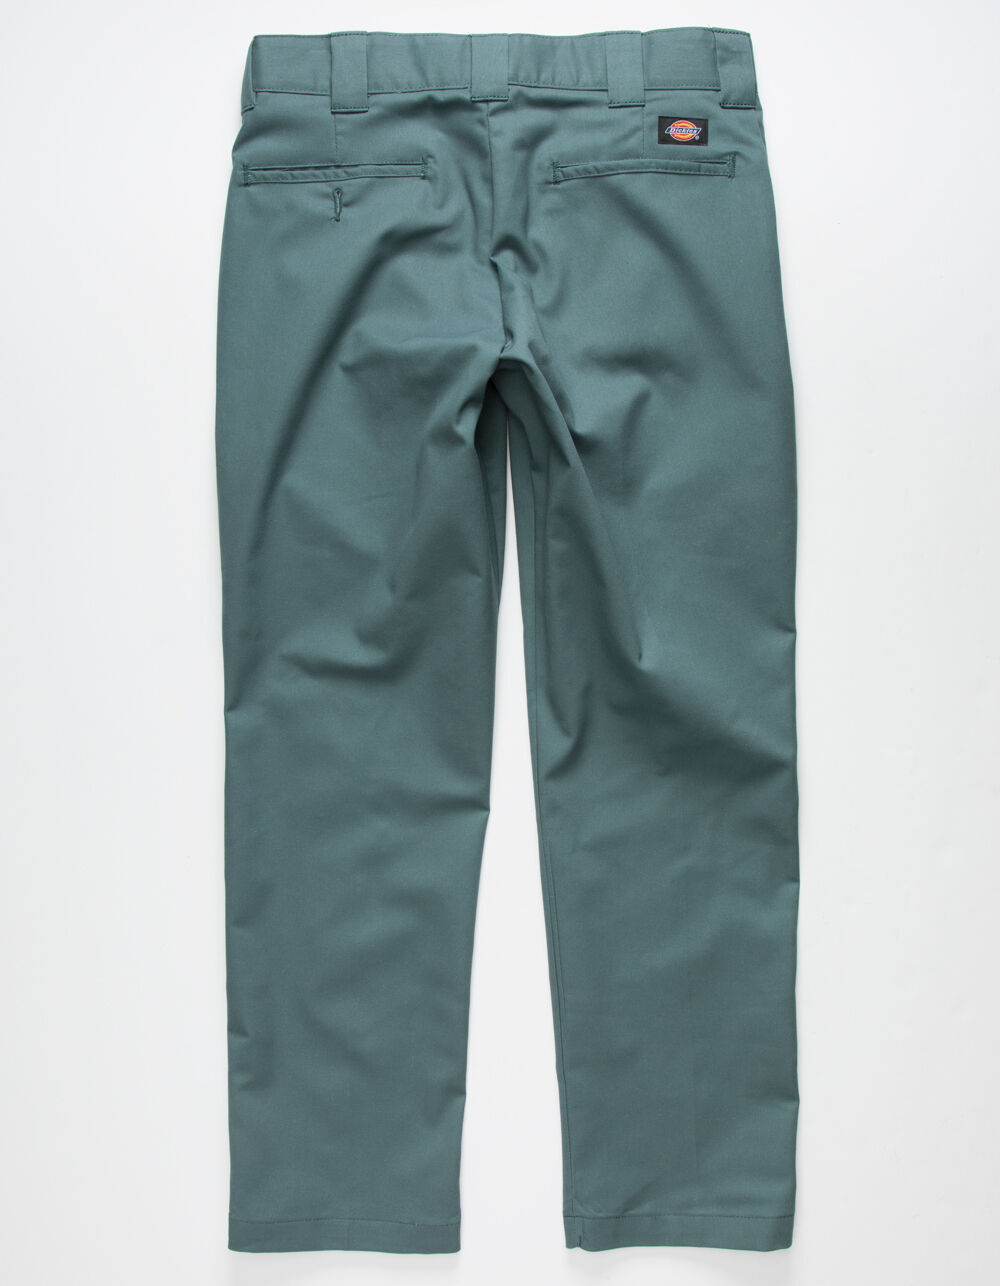 875 Tapered Fit Pants in Lincoln Green - Glue Store